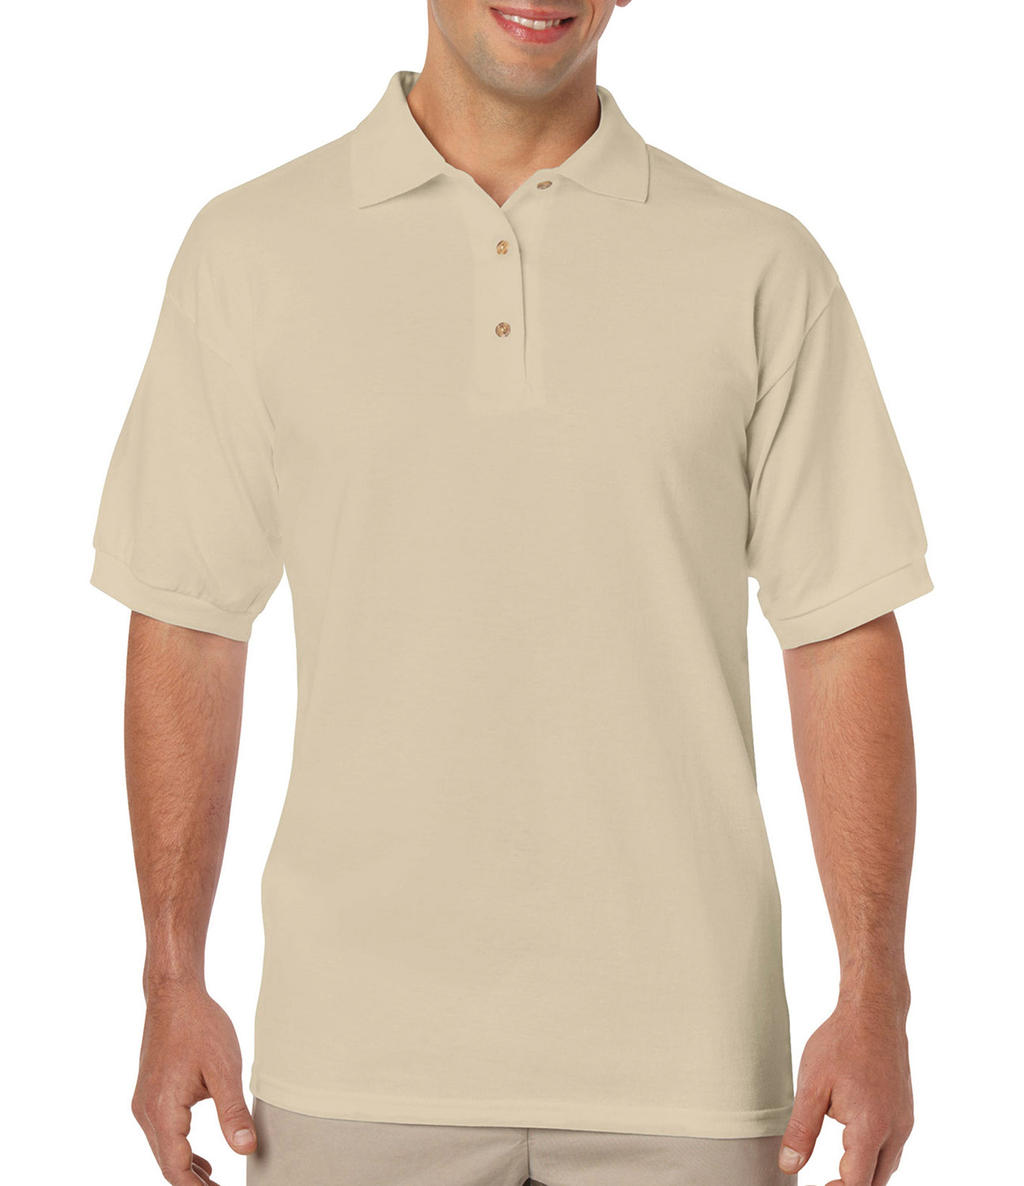  DryBlend Adult Jersey Polo in Farbe Sand